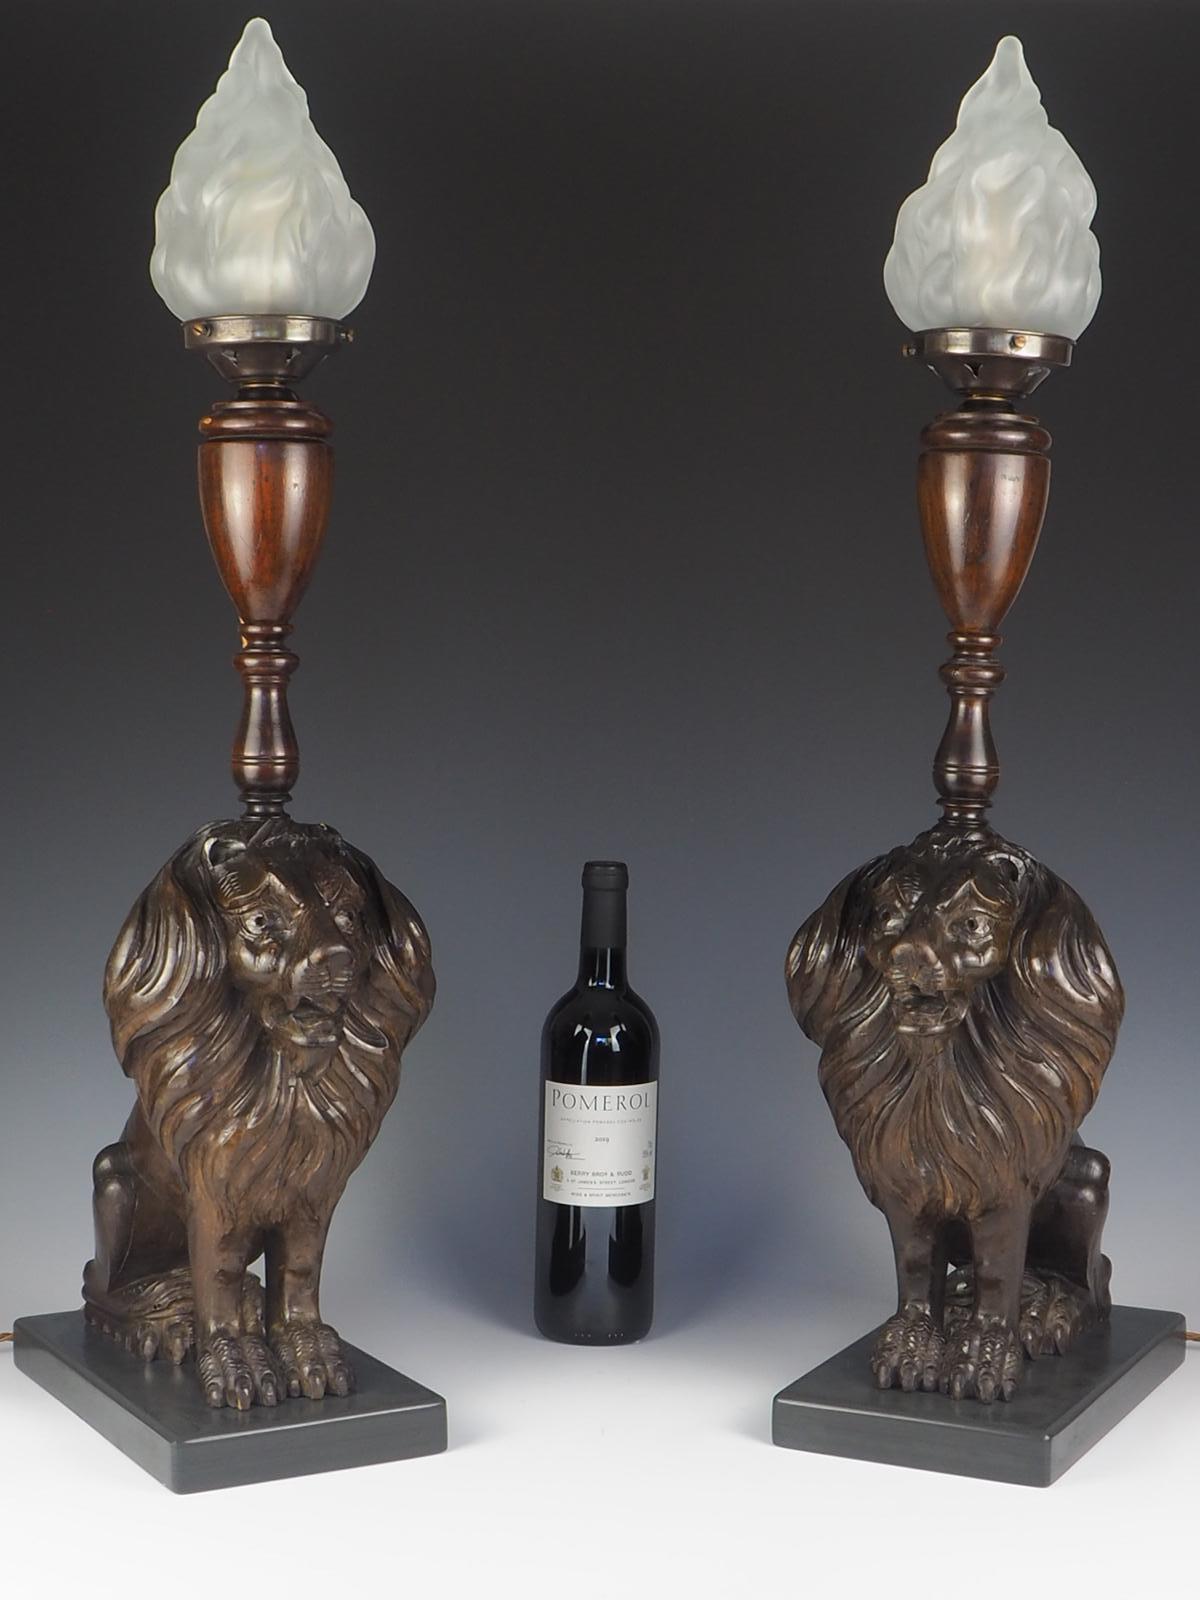 Pair of 19th century carved oak lion lamps

Beautiful pair of carved oak lion lamps with frosted glass flame shade. This 19th century pair of table lamps each features a lion sitting proudly on a grey slate base, propped on its front legs, with